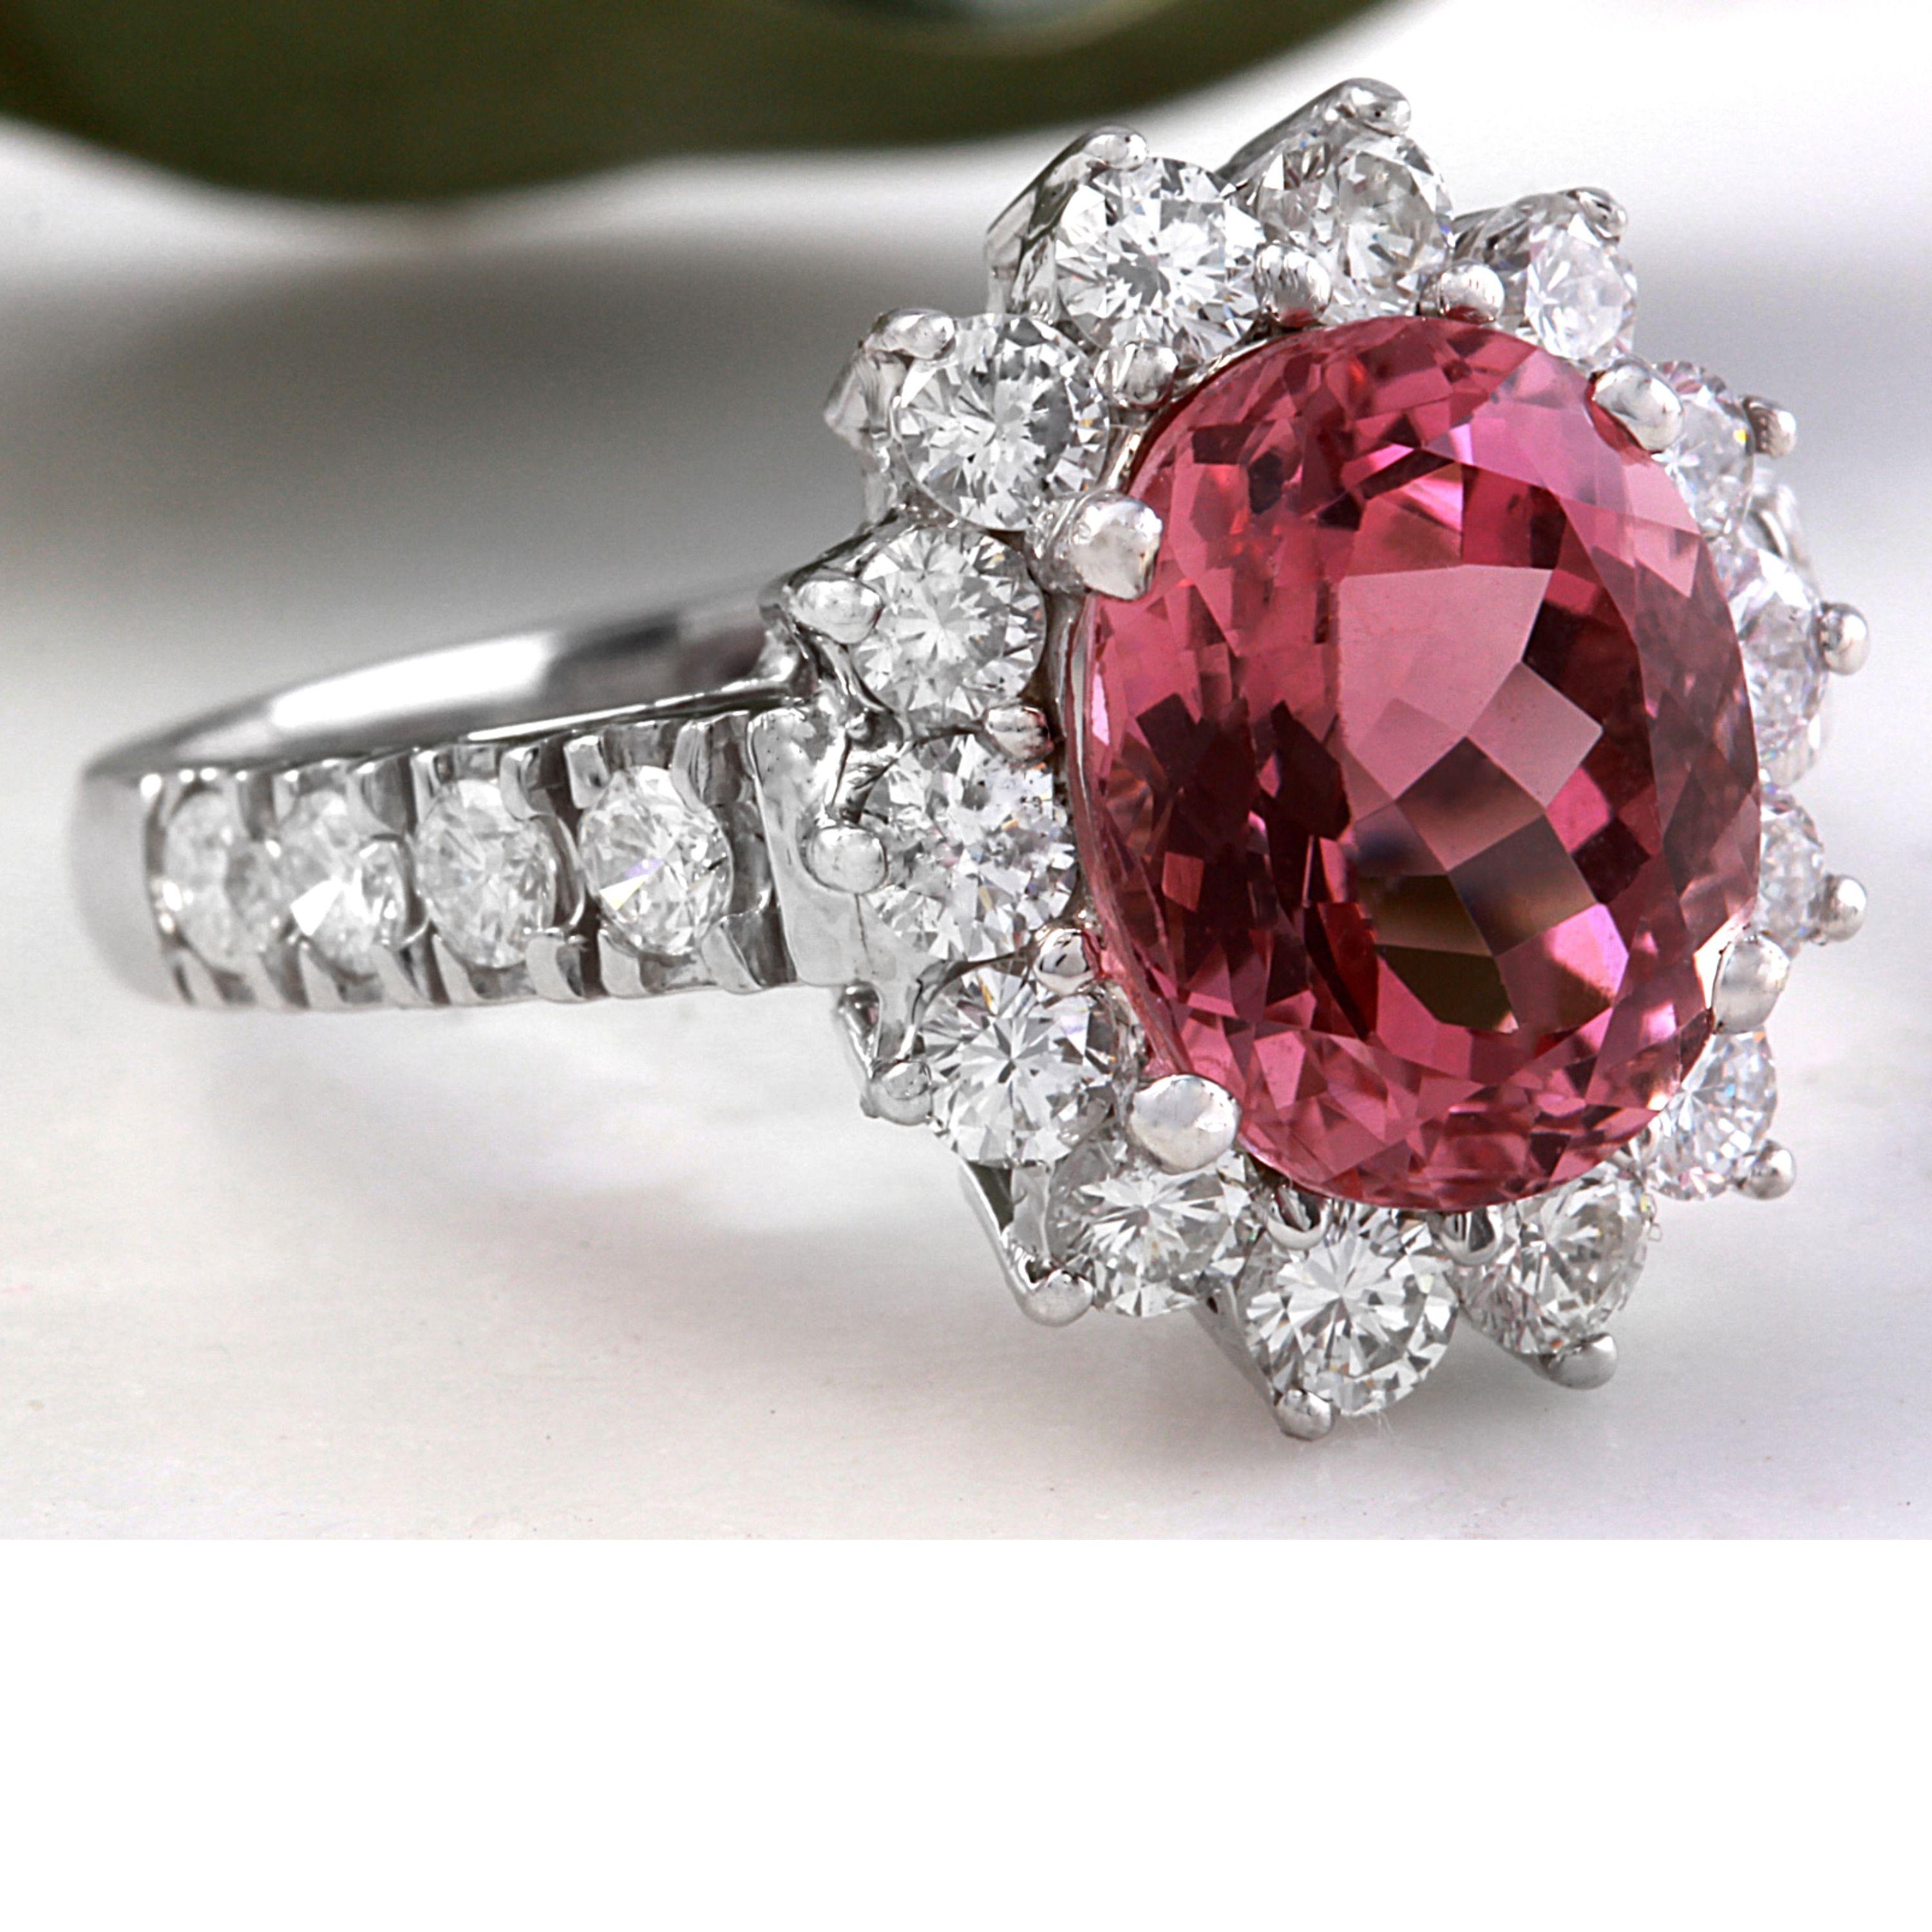 5.60 Carats Natural Very Nice Looking Tourmaline and Diamond 14K Solid White Gold Ring

Total Natural Oval Cut Tourmaline Weight is: Approx. 4.50 Carats (Treatment-Heat)

Tourmaline Measures: Approx. 11.00 x 9.00mm

Natural Round Diamonds Weight: